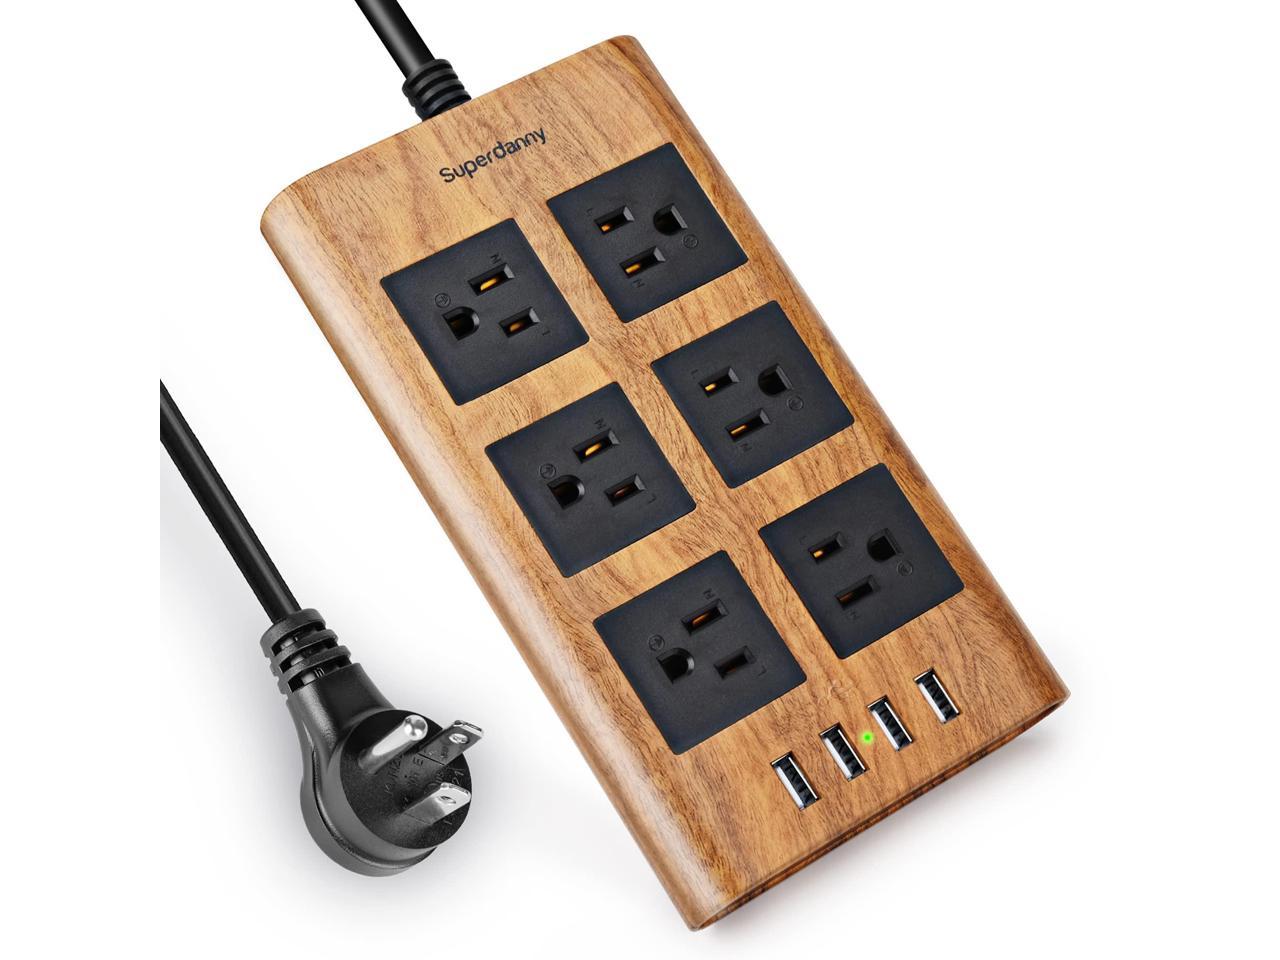 SUPERDANNY 9.8ft Surge Protector Power Strip Right Angled Extension Cord 6-Outlet with 4 USB Fast Charging Ports and 3000W 15A 900J for iPhone iPad Home Indoor Office Desktop Dark Wood Color 